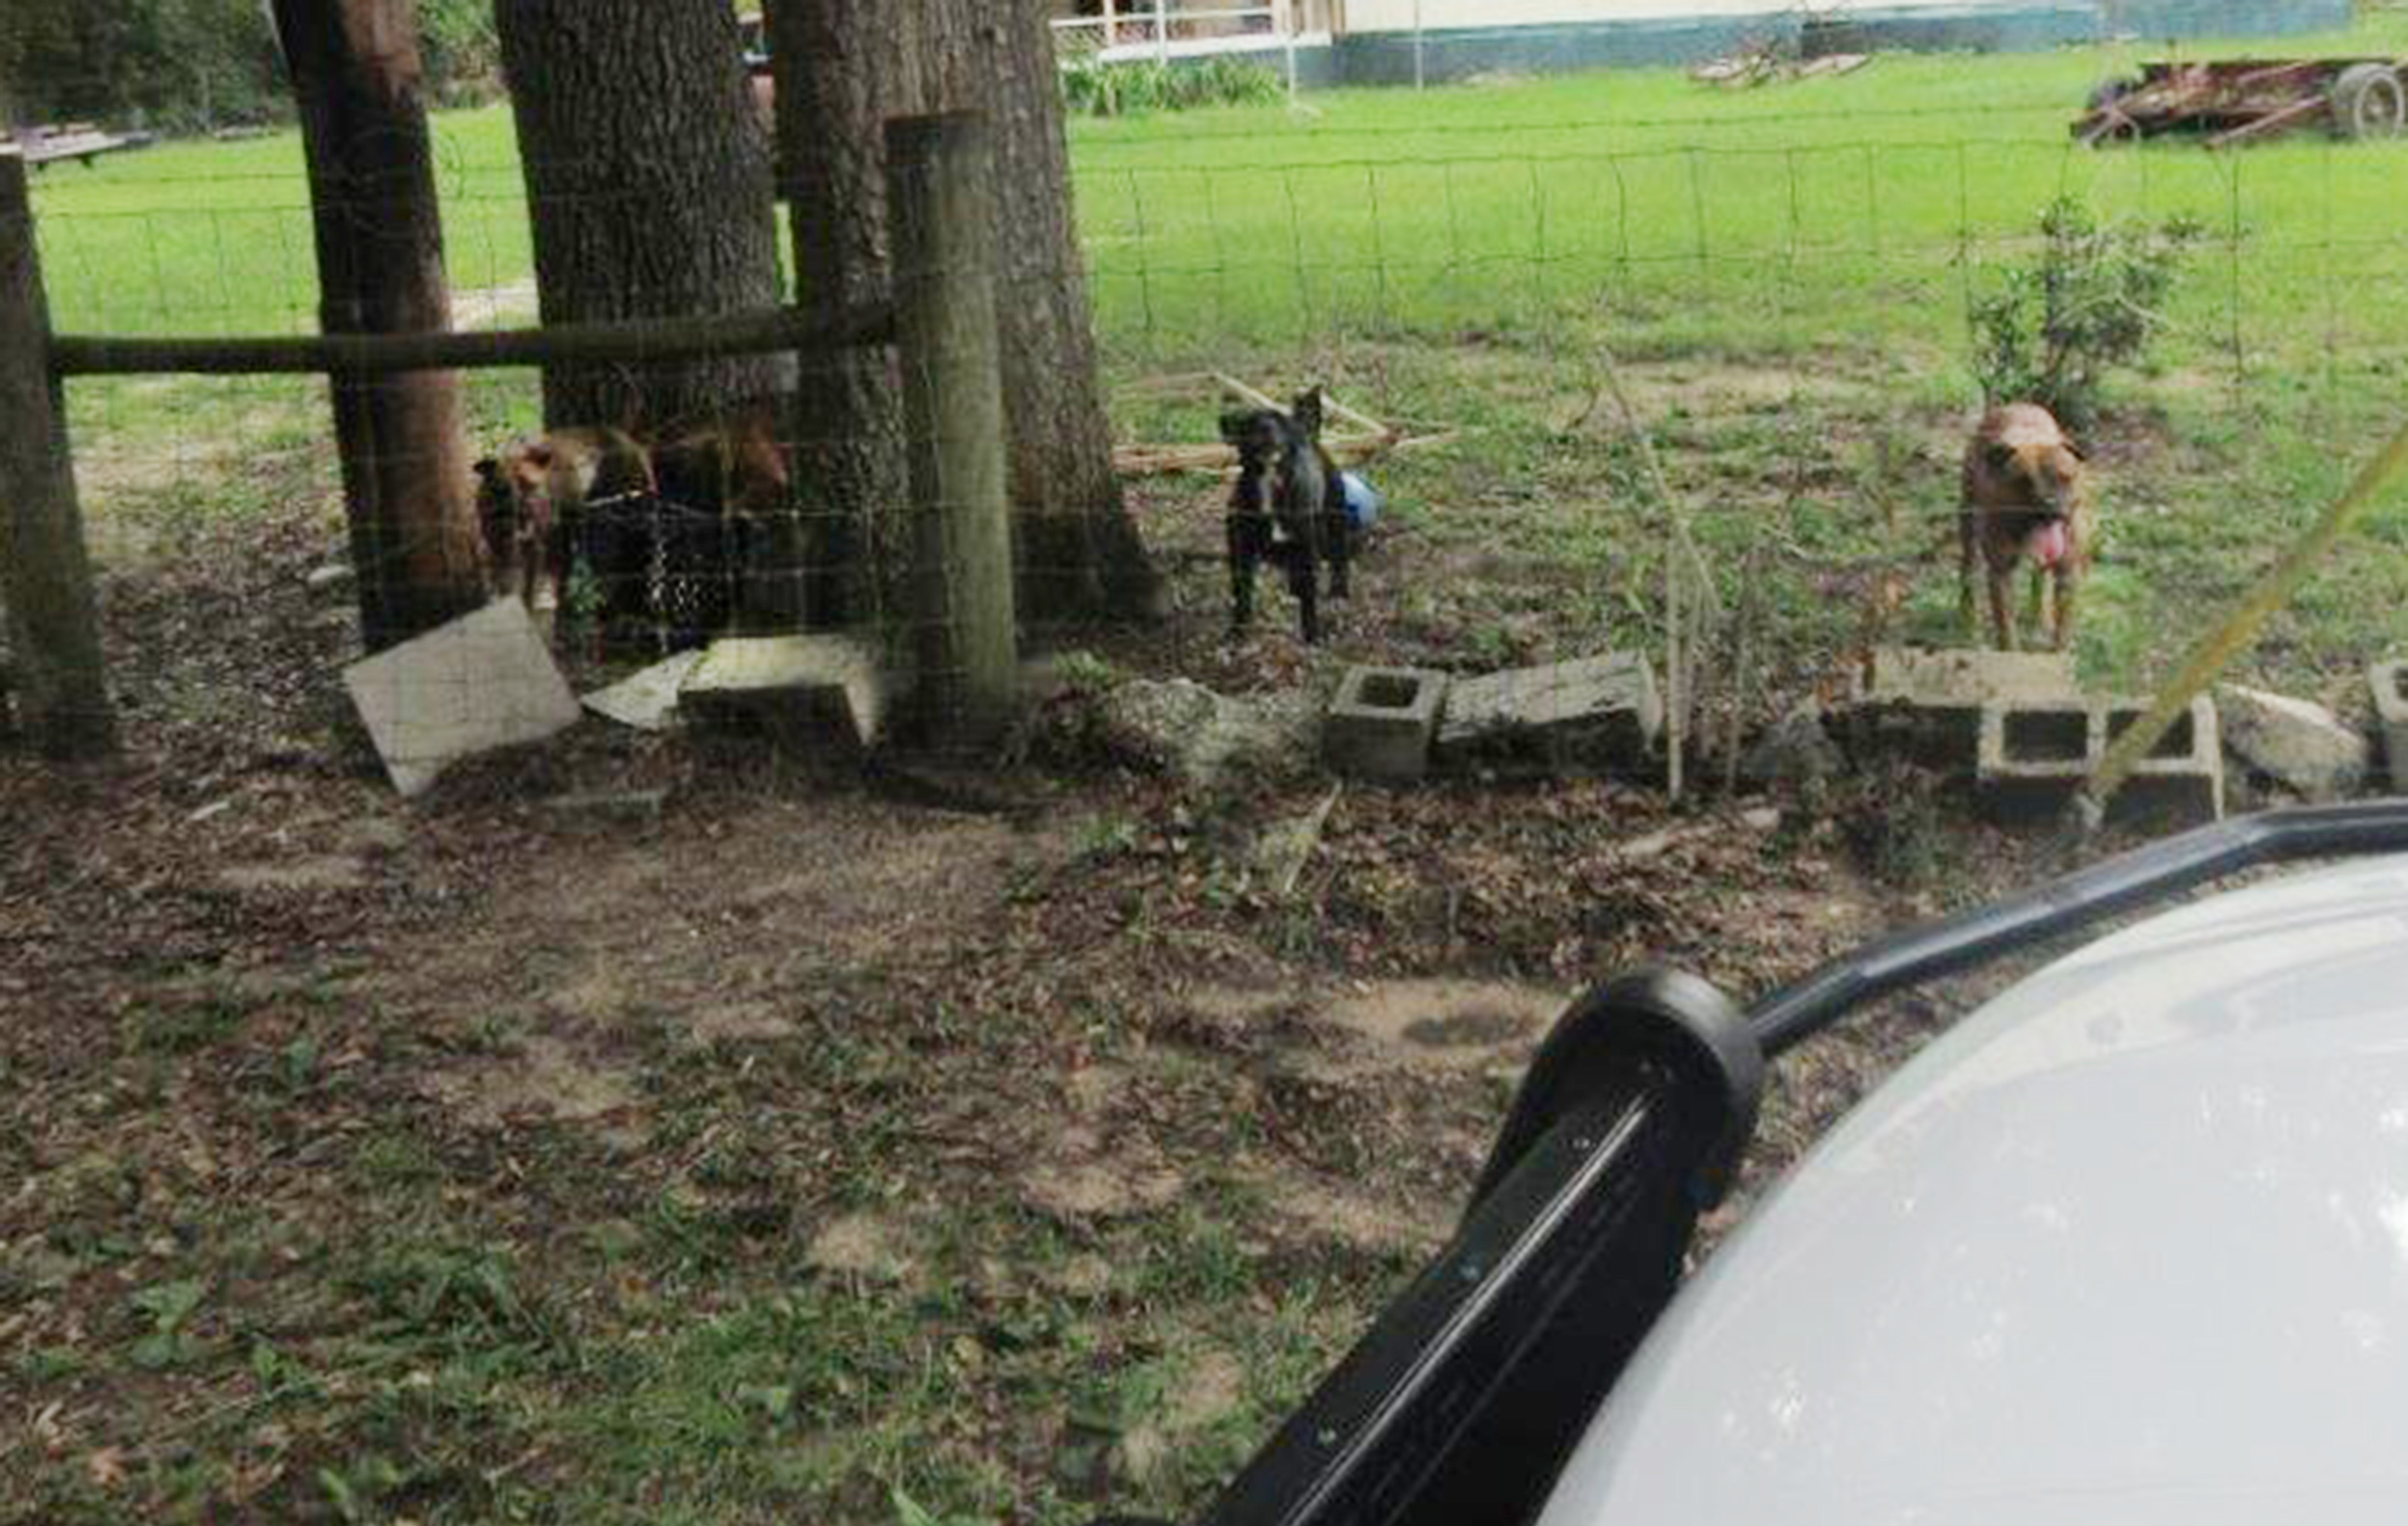 PHOTO: This photo released by the Putnam County Sheriff's Office shows dogs that were allegedly involved in a deadly attack on a U.S. Postal Service worker in the Interlachen Lake Estates area of Putnam County, Fla., on Aug. 21, 2022.